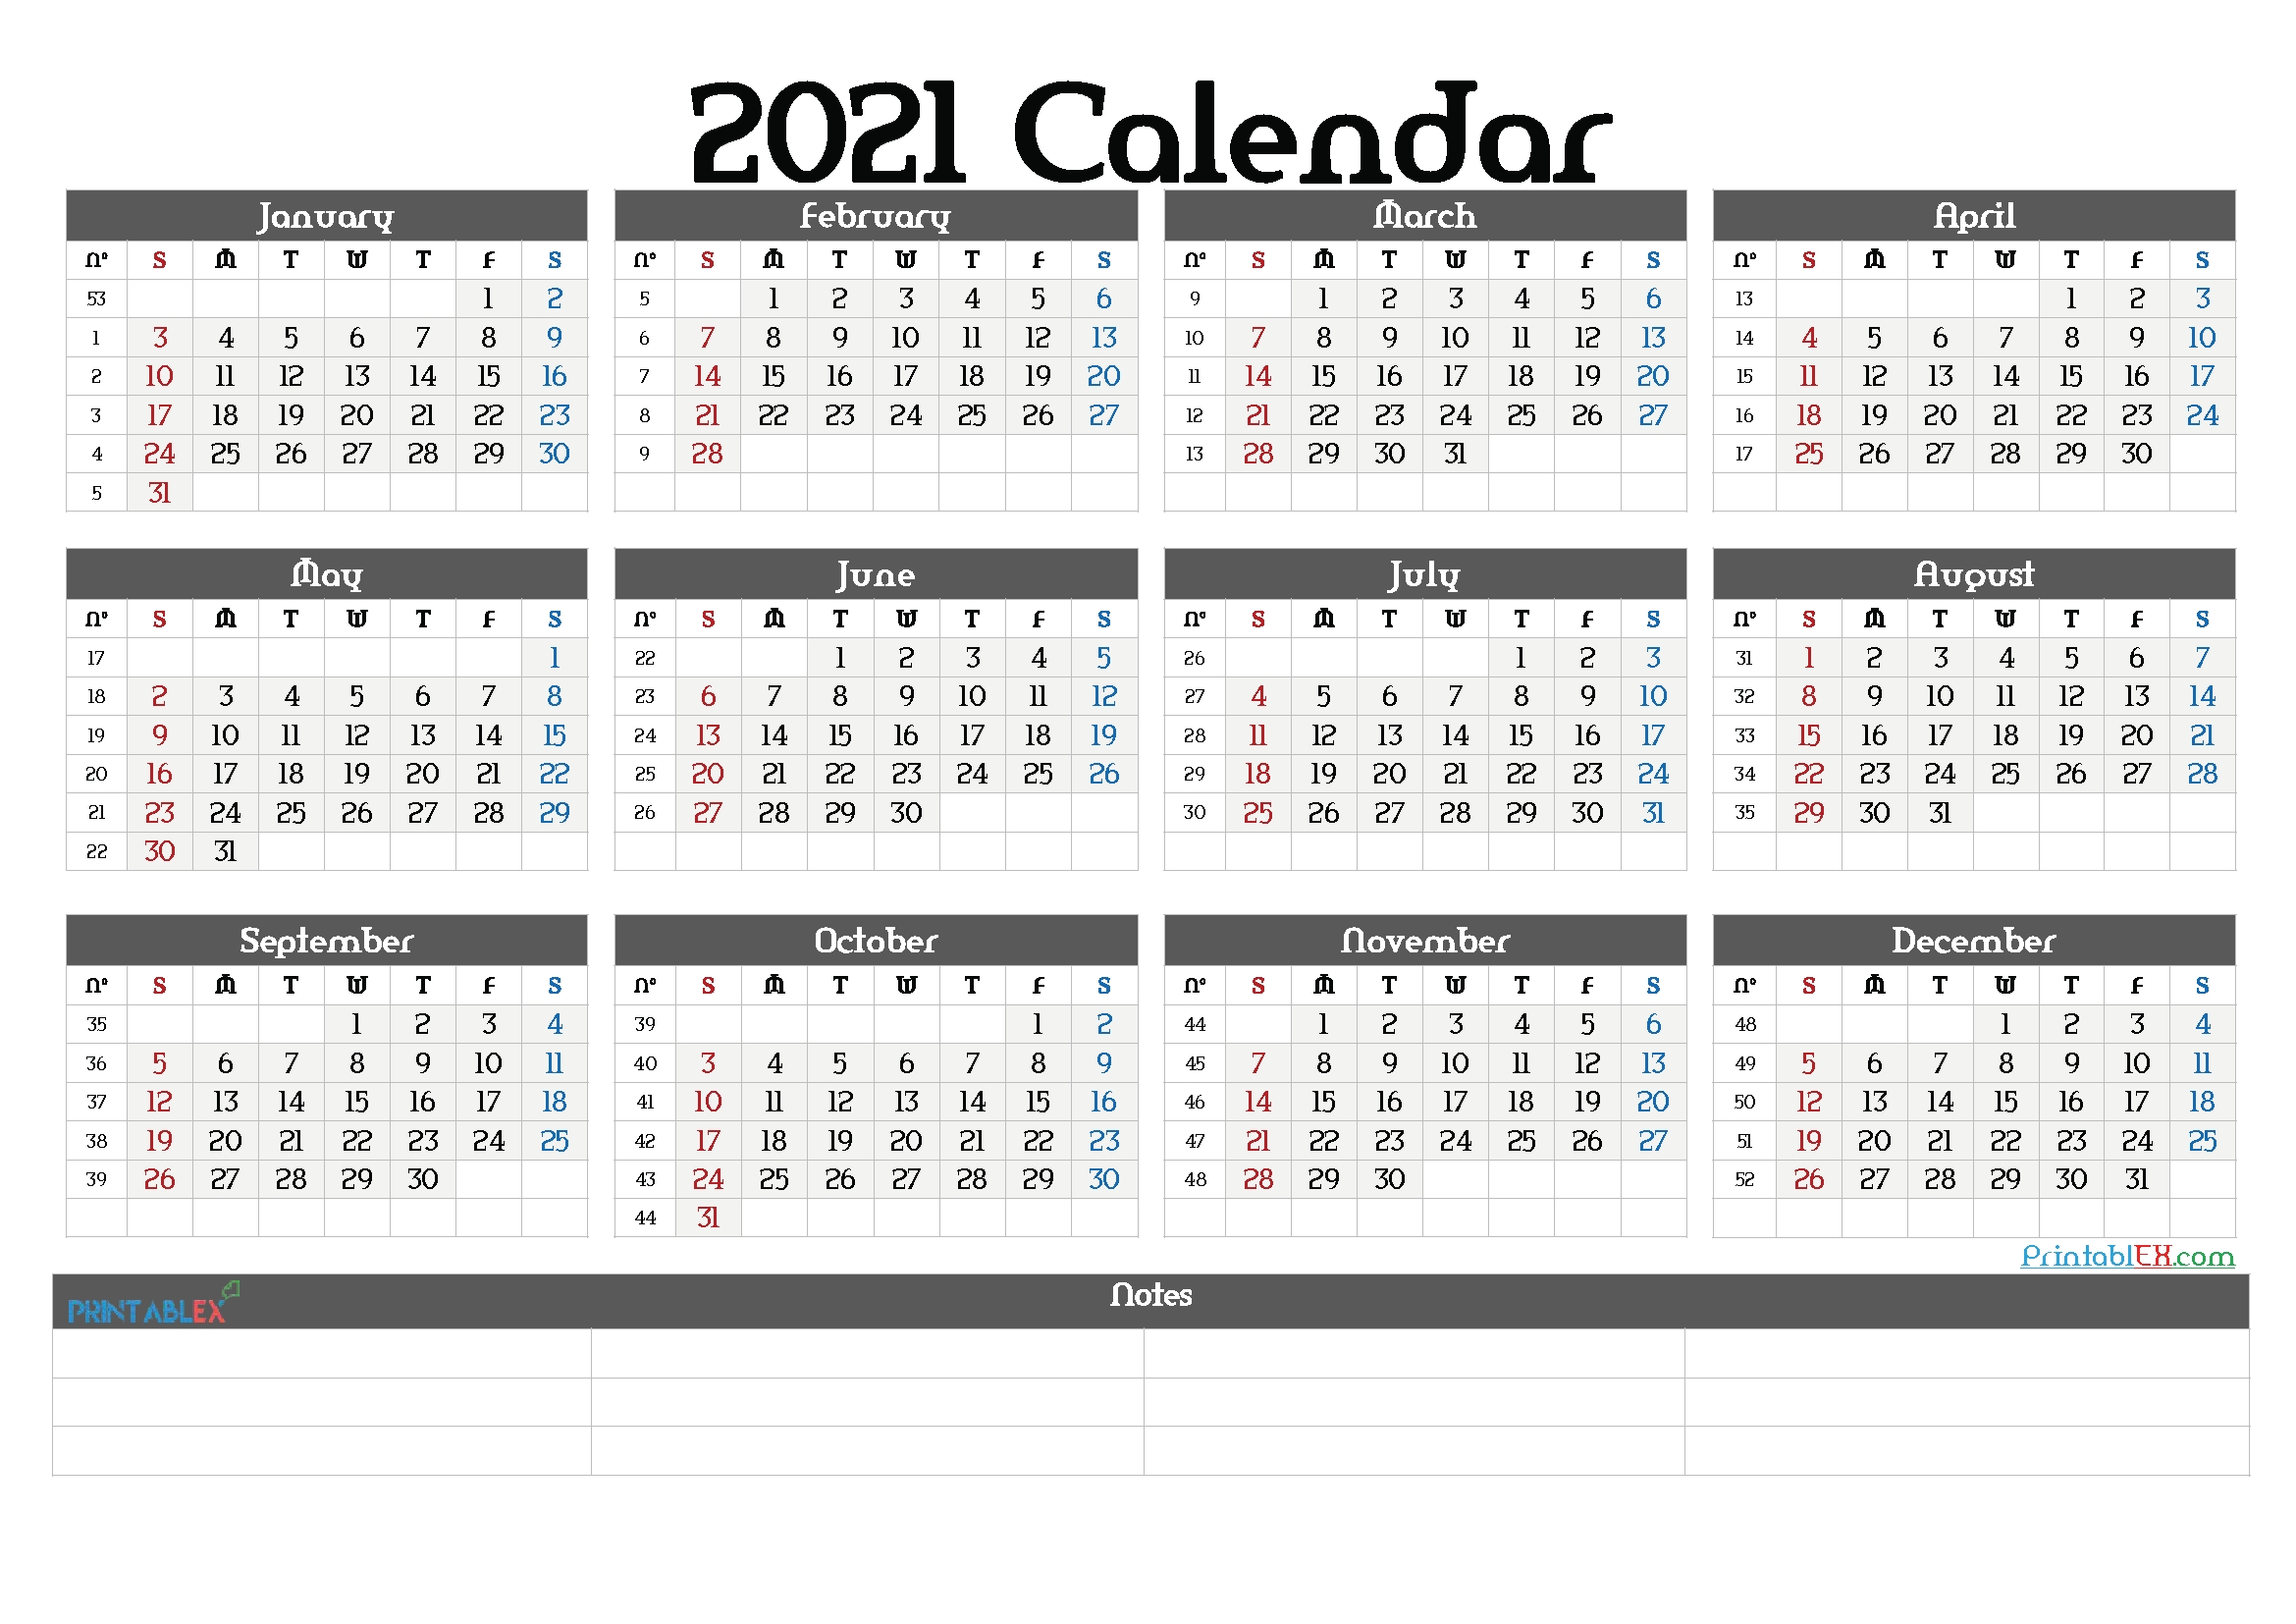 2021 Calendar With Weeks Numbered | Printable March